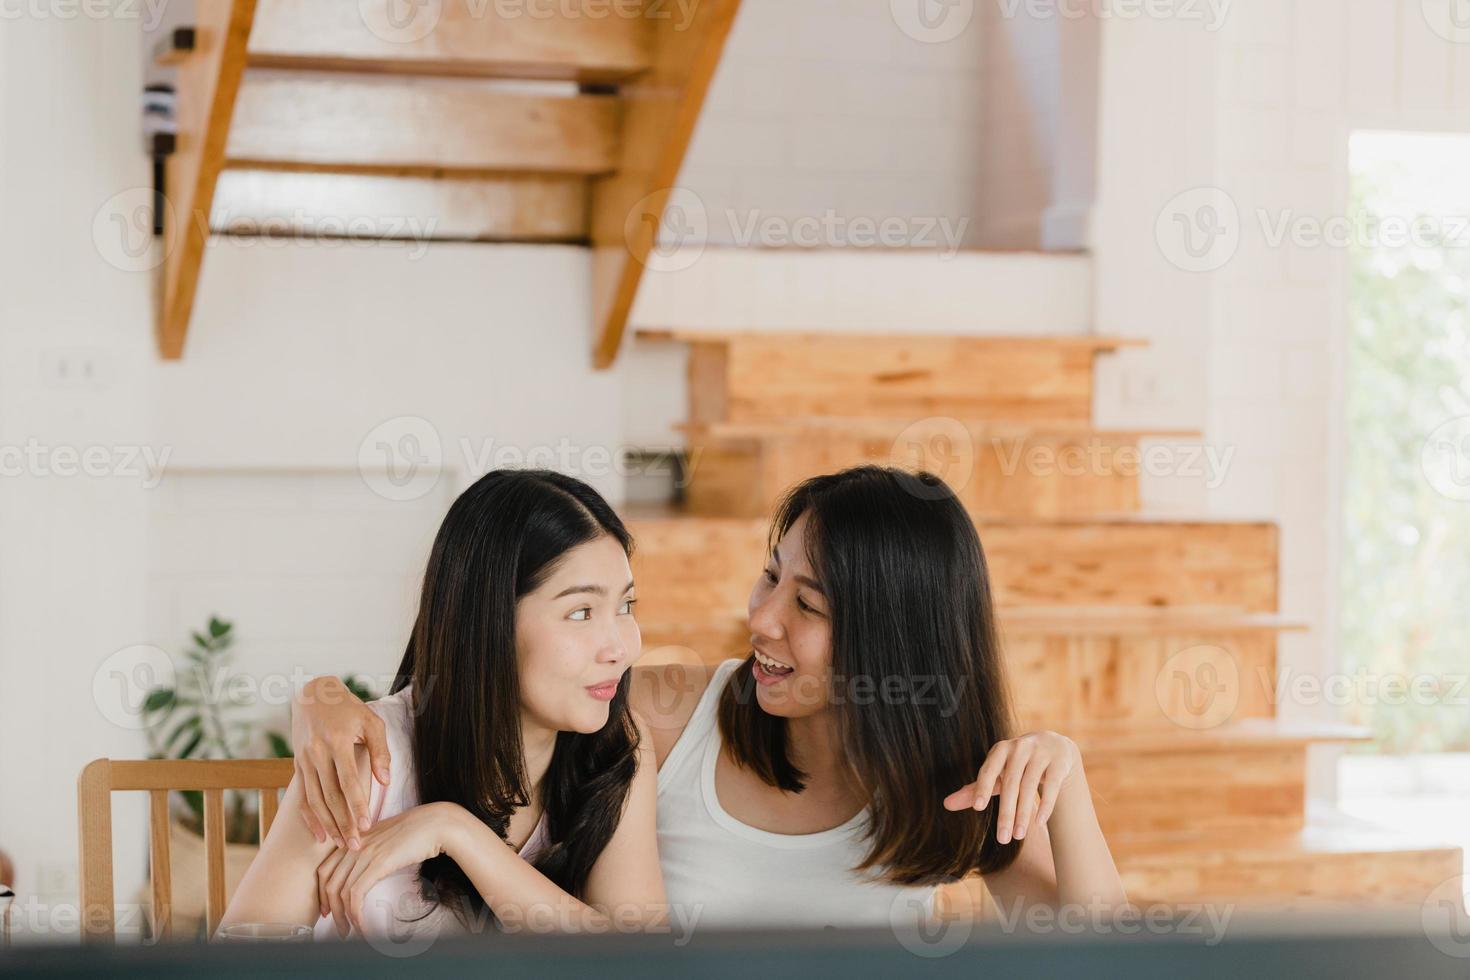 Asian Lesbian lgbtq women couple have breakfast at home, Young Asia lover girls happy watching TV while drink juice, corn flakes cereal and milk in bowl on table in kitchen in the morning concept. photo